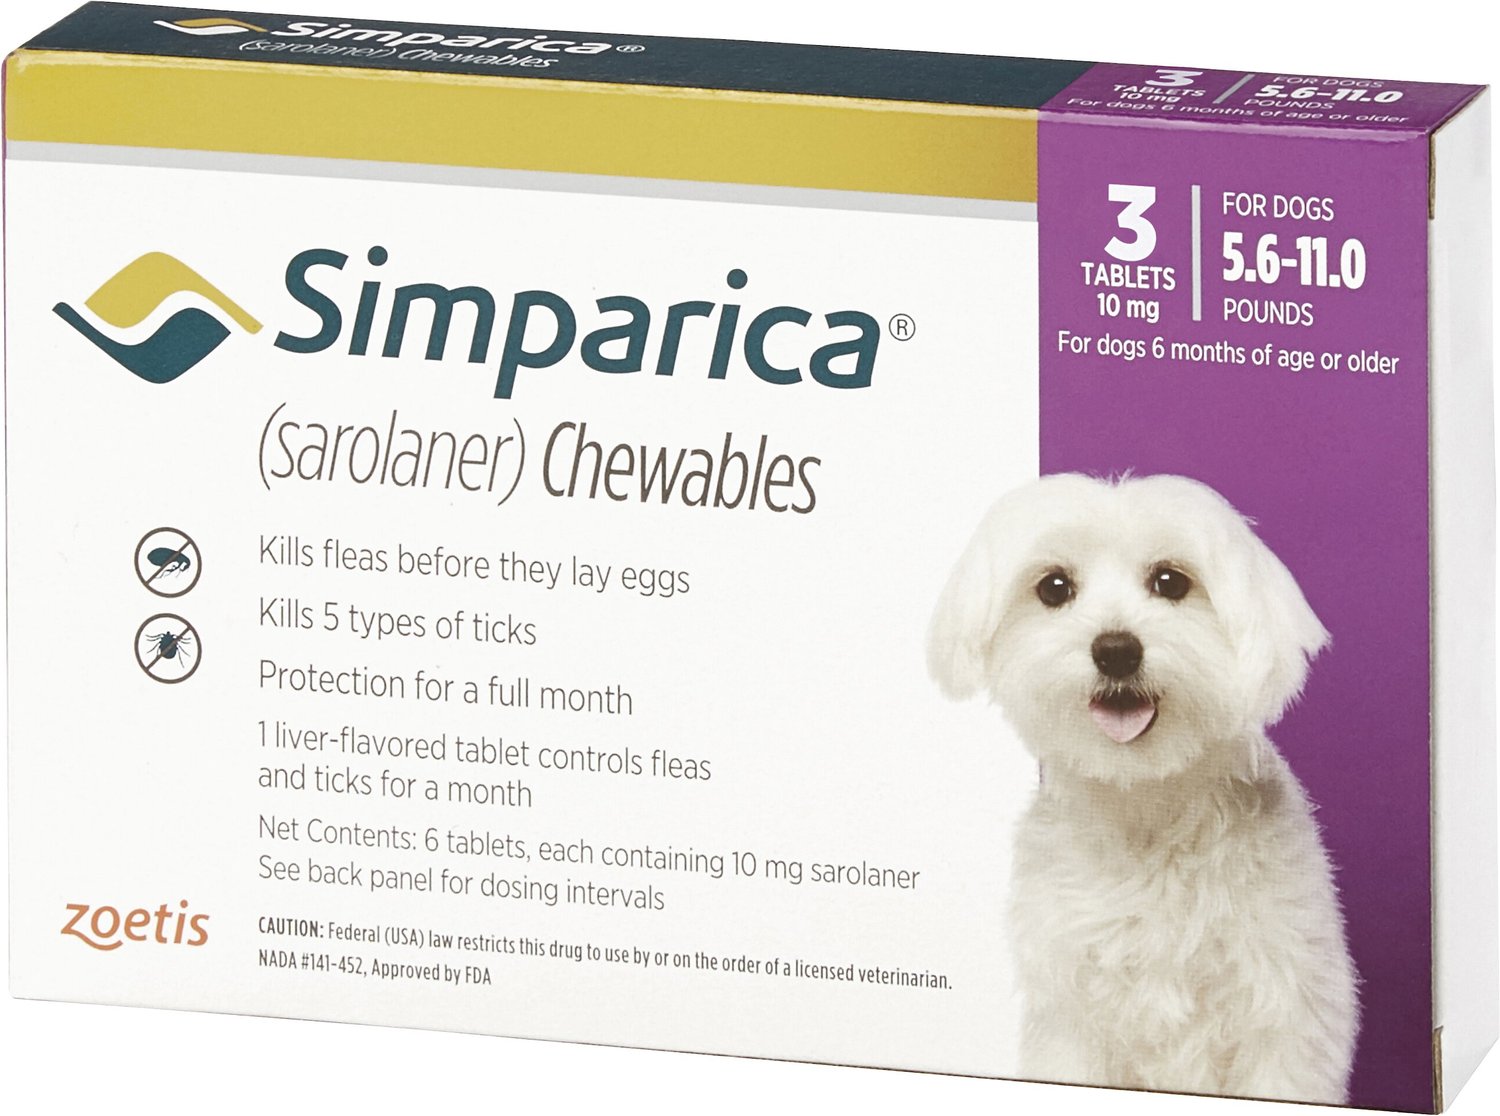 Simparica Chewable Tablets for Dogs, 5.611 lbs, 3 treatments